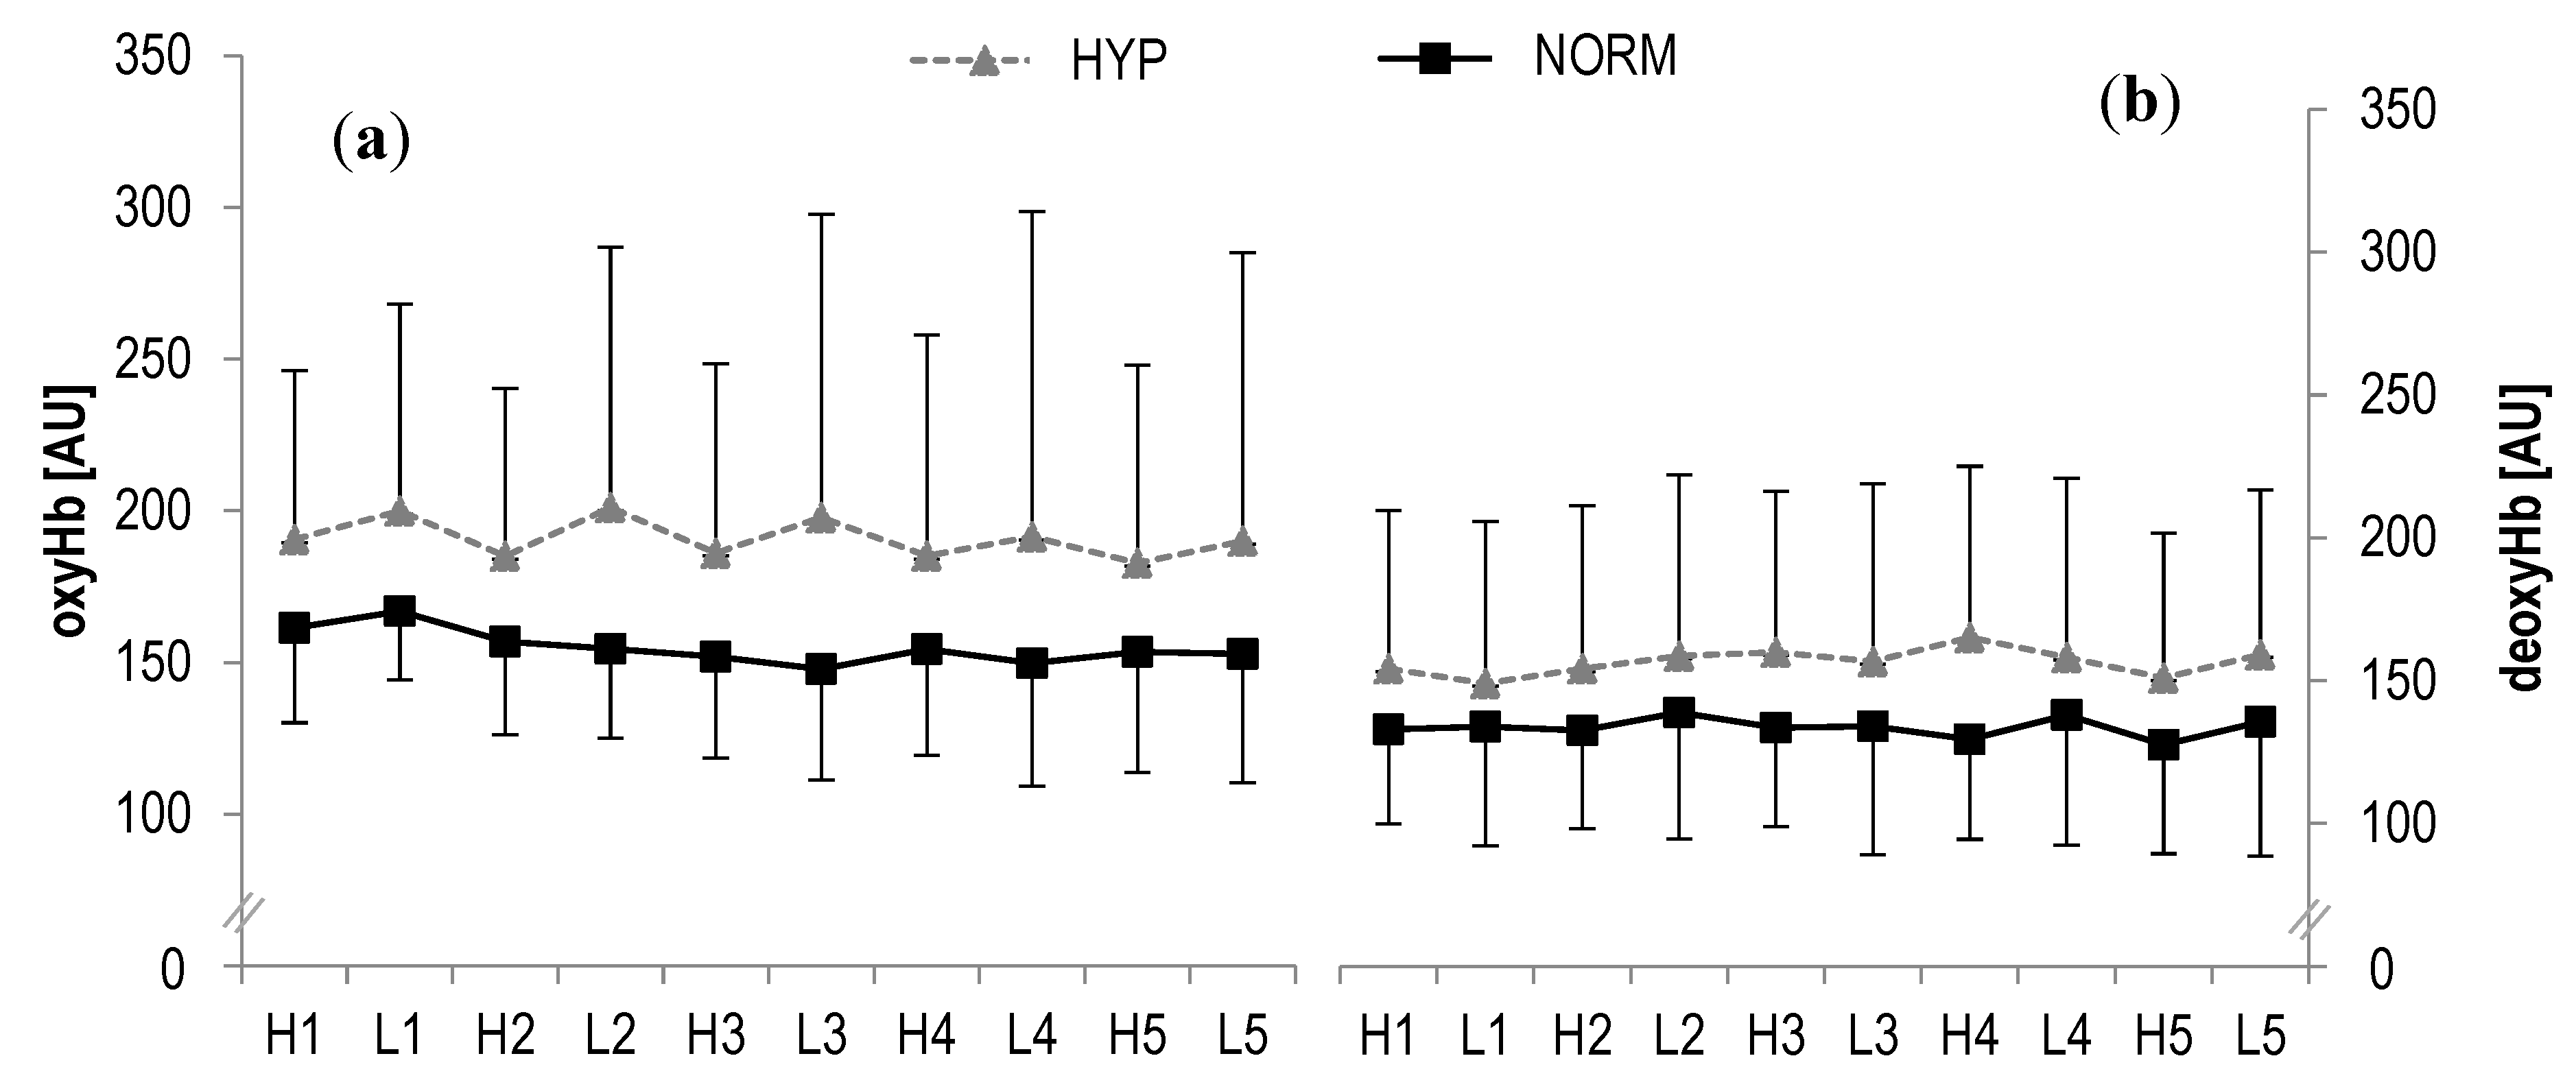 Sports Free Full Text Acute Low Dose Hyperoxia During A Single Bout Of High Intensity Interval Exercise Does Not Affect Red Blood Cell Deformability And Muscle Oxygenation In Trained Men A Randomized Crossover Study